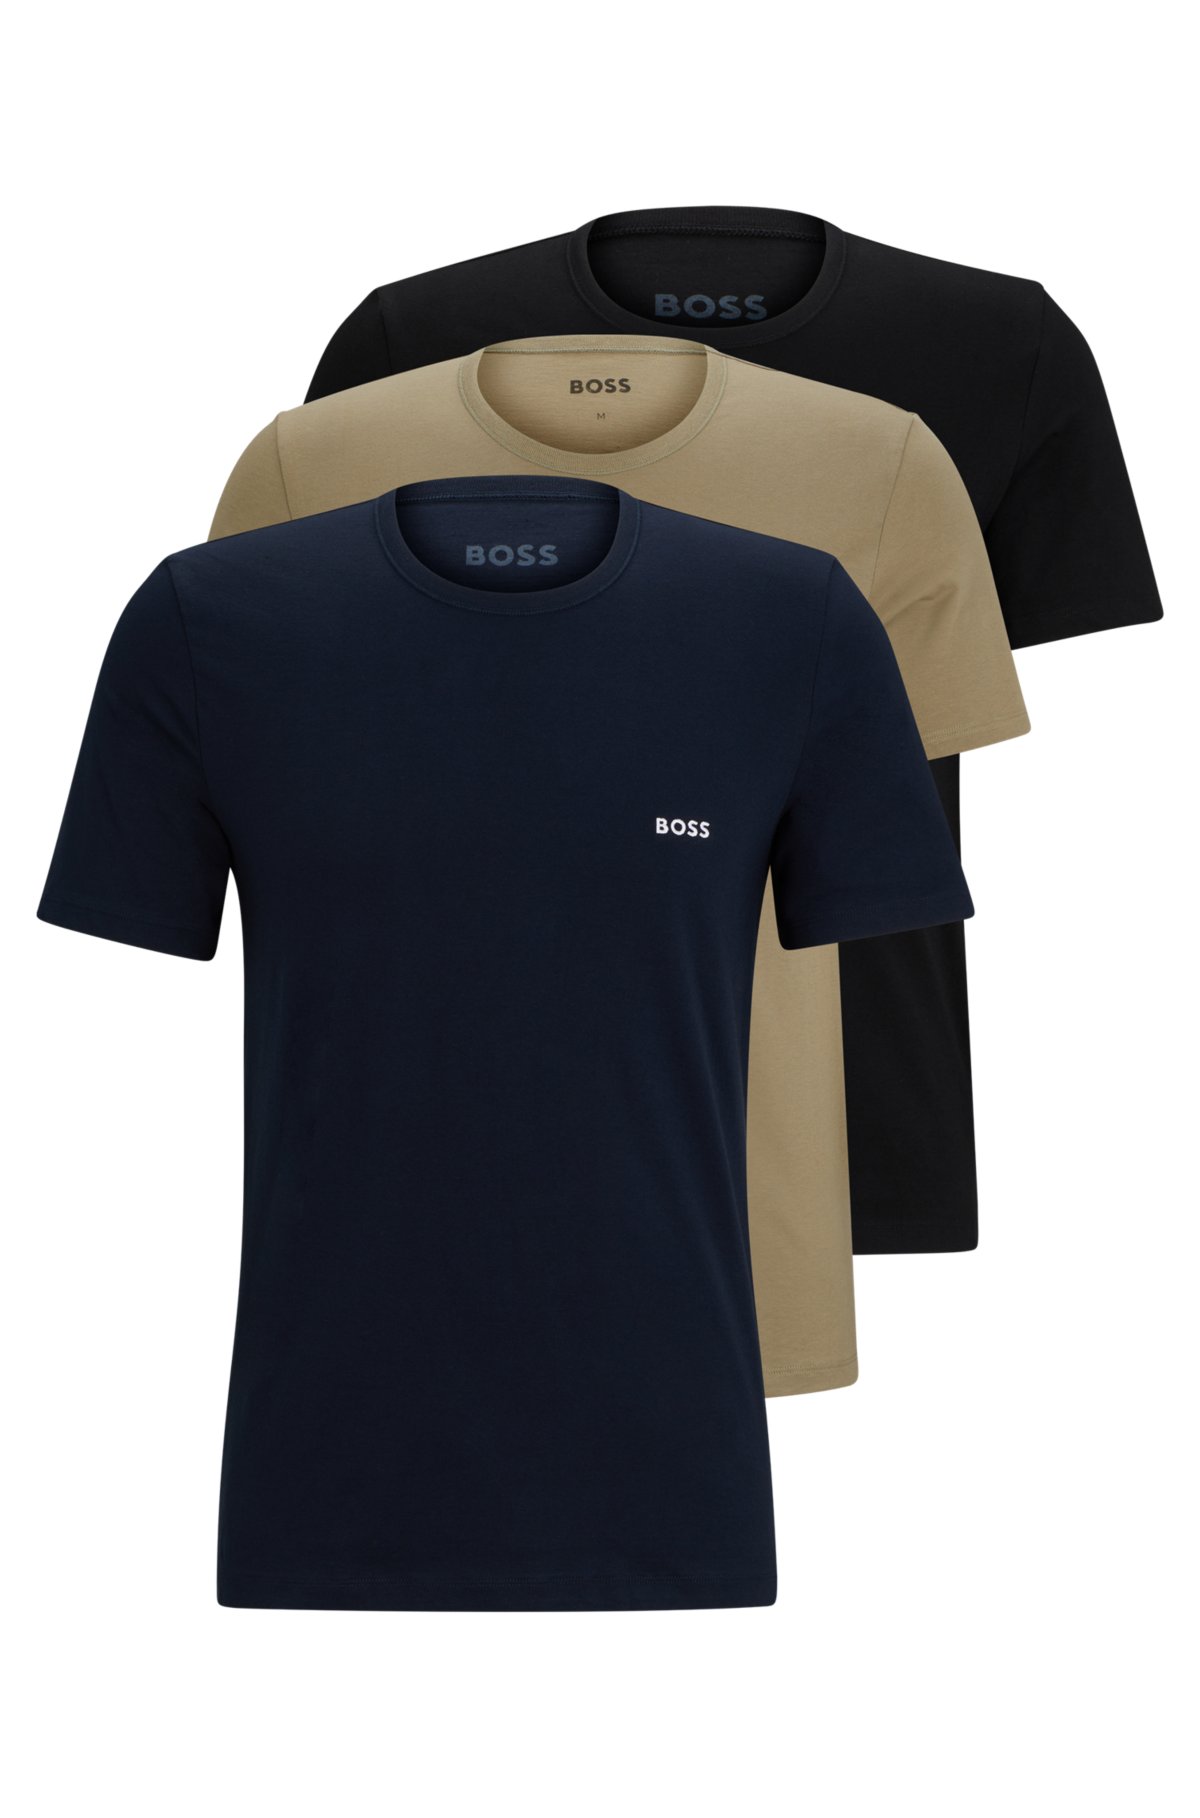 BOSS - Three-pack of underwear T-shirts in cotton jersey